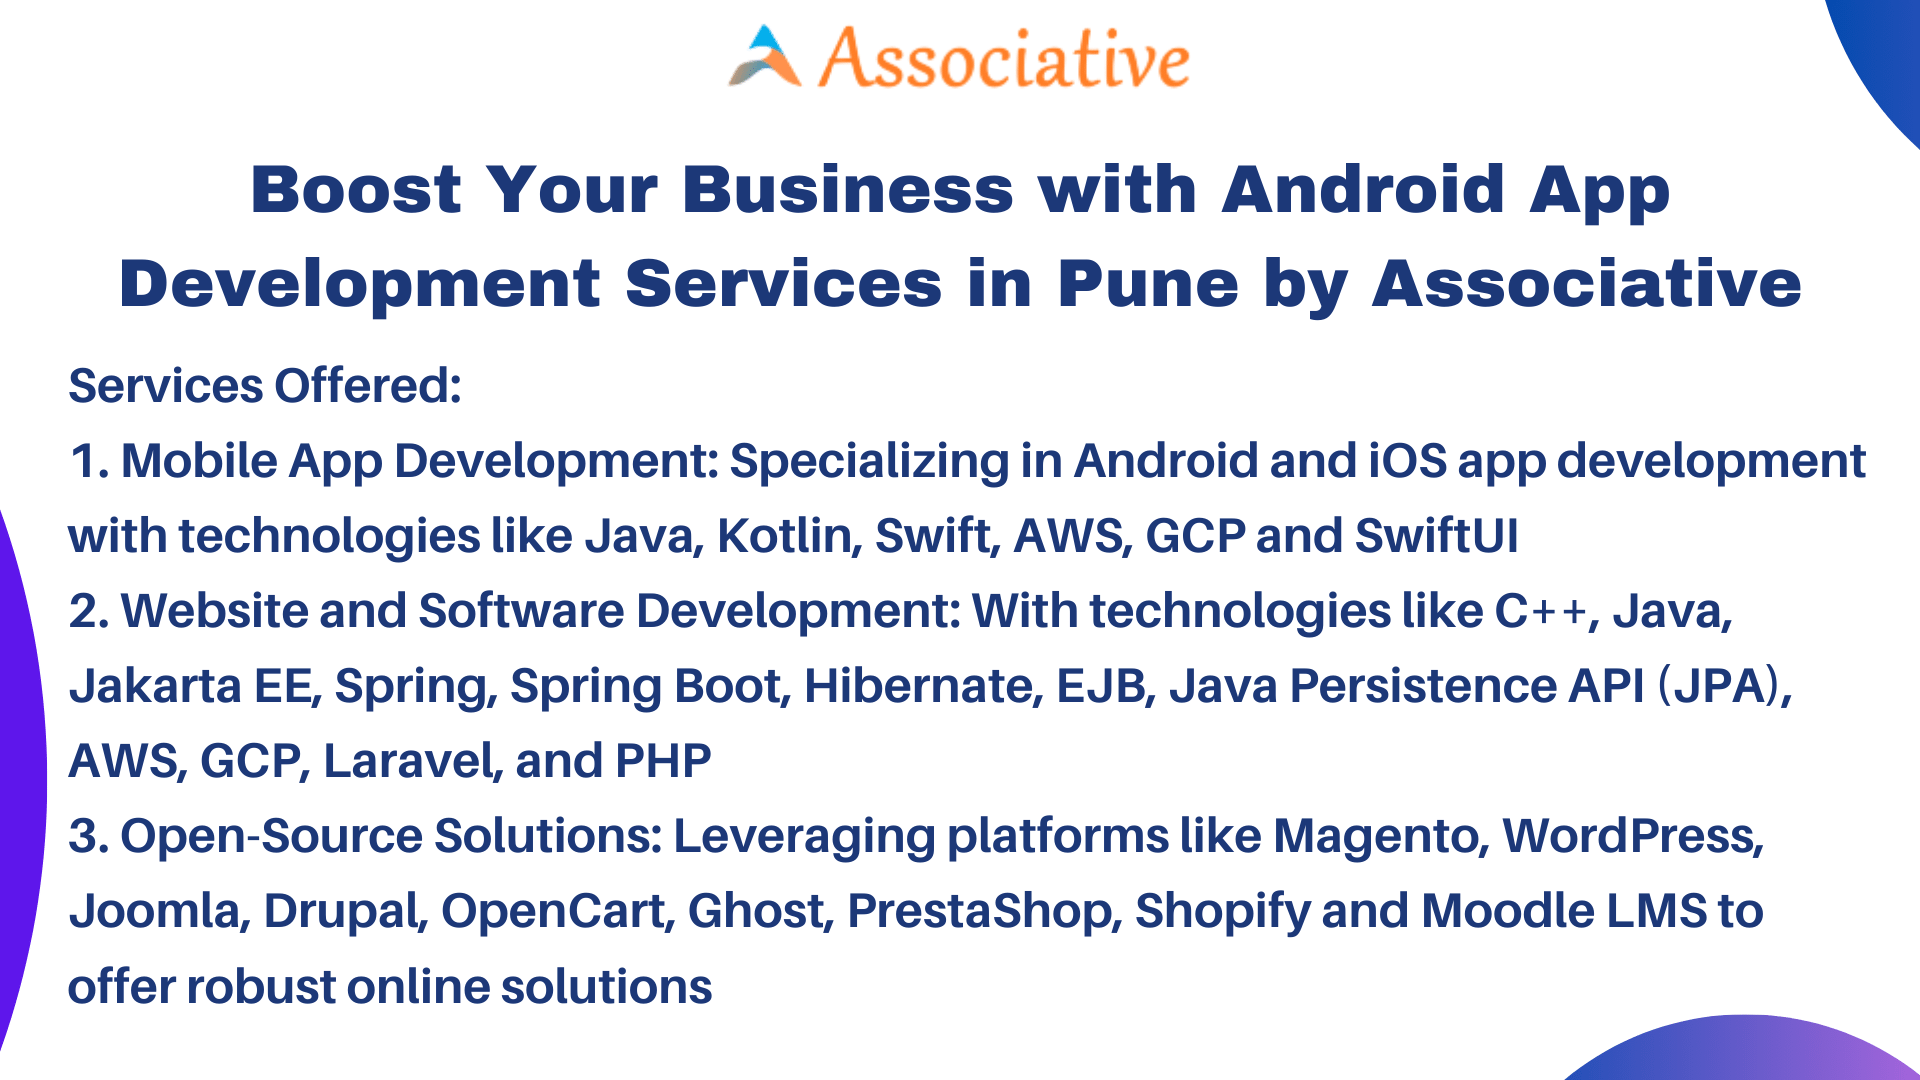 Boost Your Business with Android App Development Services in Pune by Associative